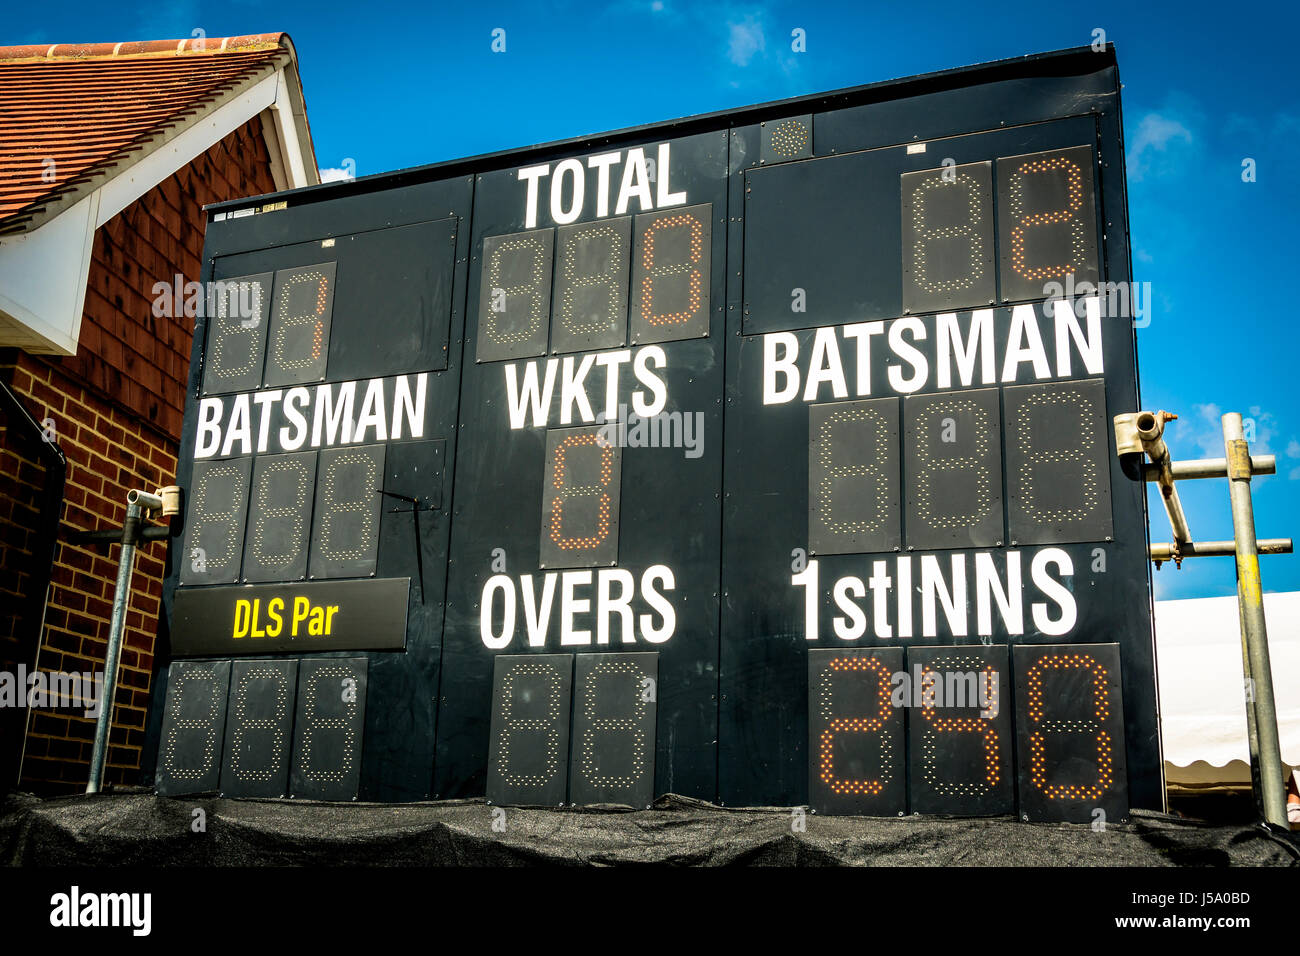 Electronic cricket scoreboard showing run chase in second innings Stock Photo